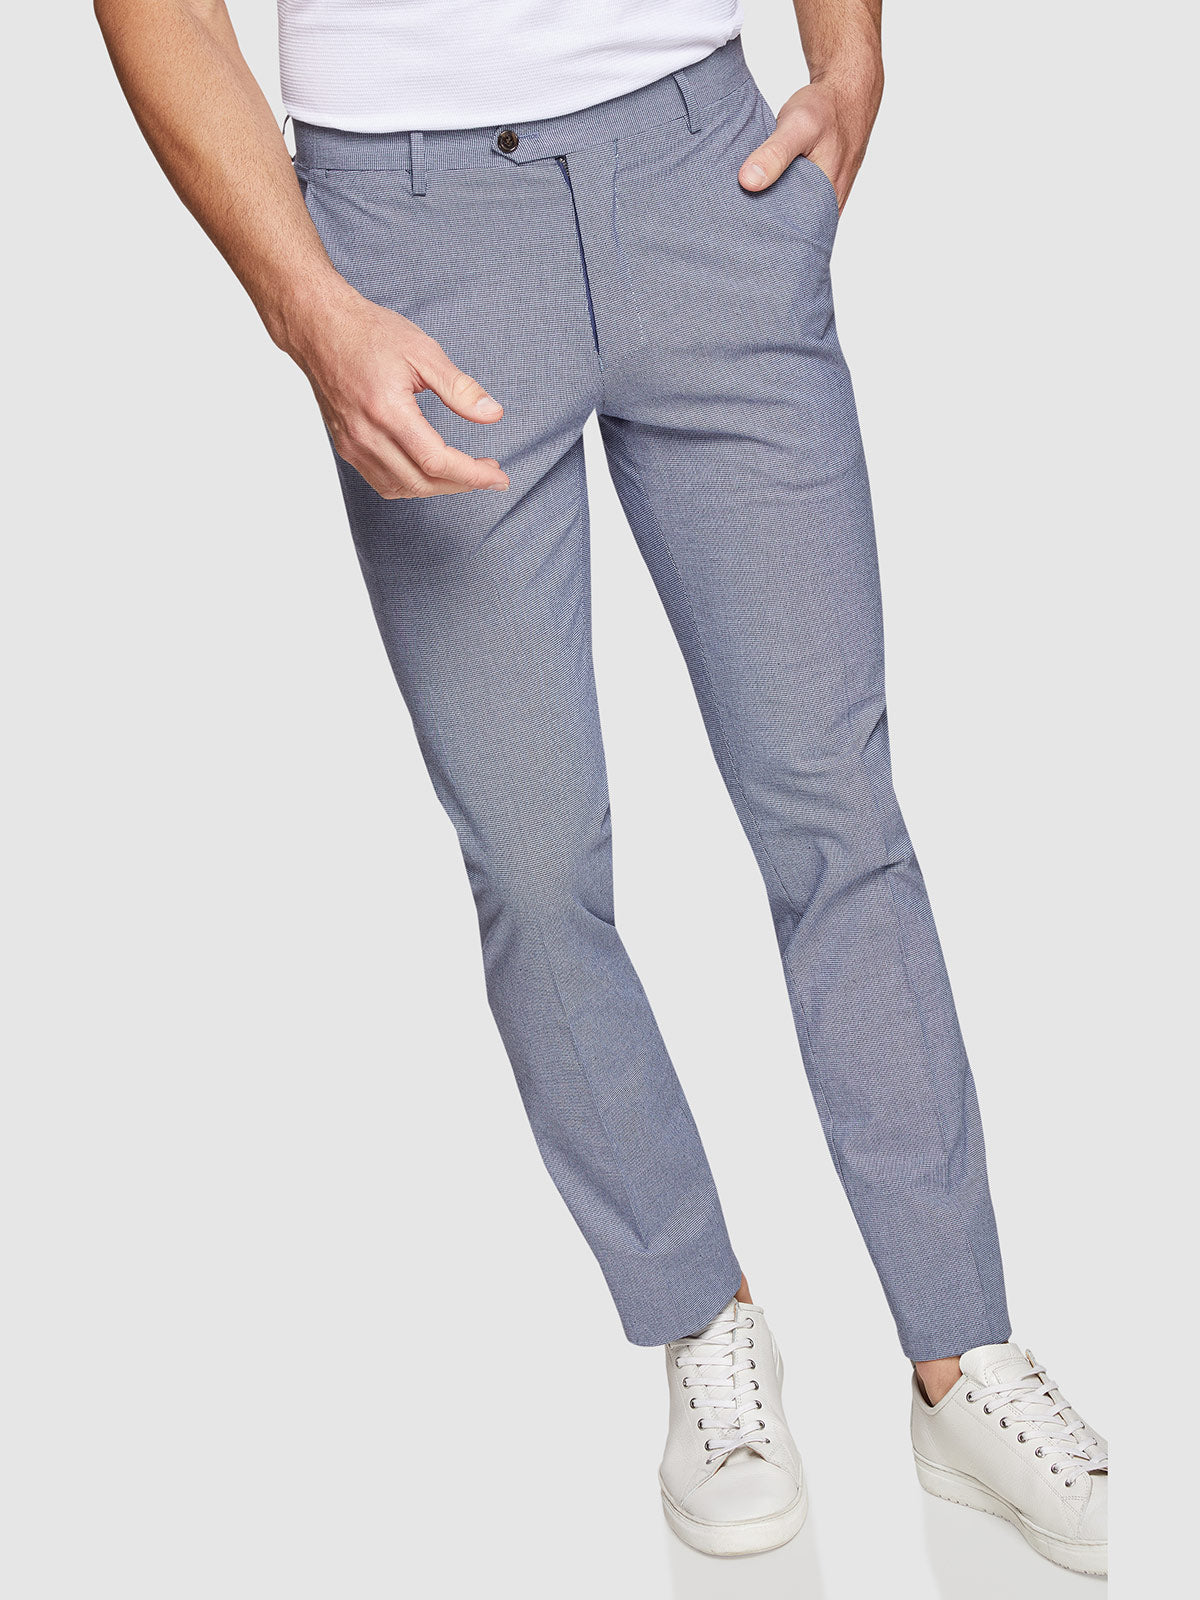 STRETCH TEXTURED TROUSERS NAVY